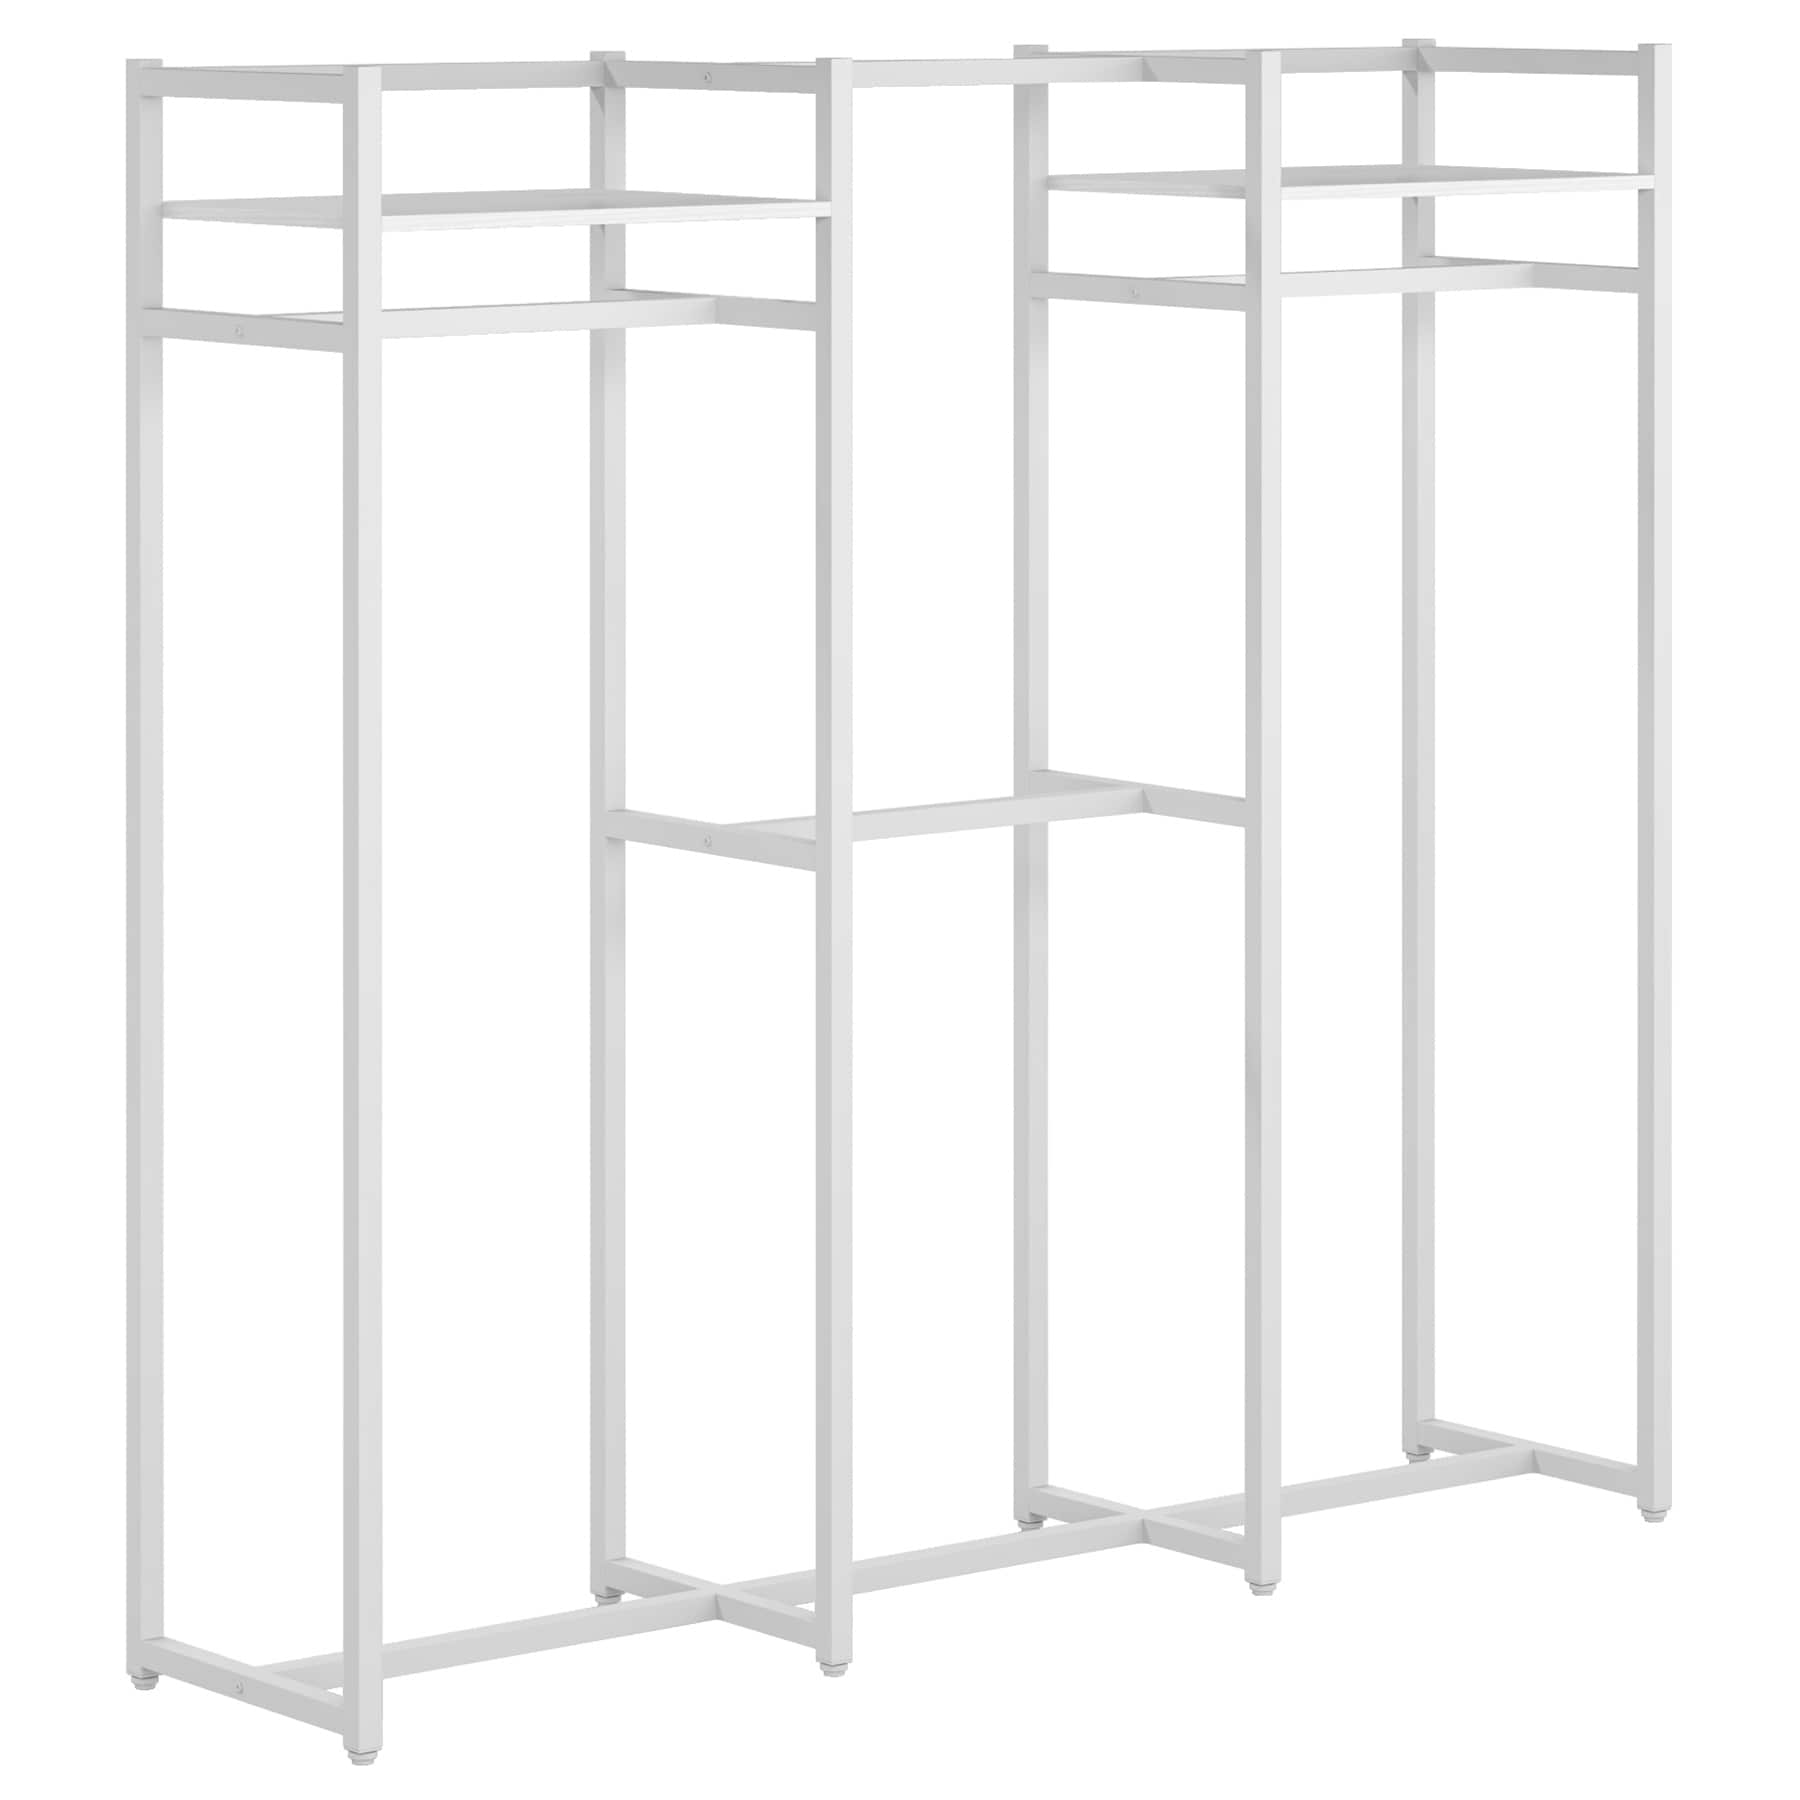 https://ak1.ostkcdn.com/images/products/is/images/direct/f21c333ccf01258c073d6ea2cad317d8fc3d8ee8/Garment-Rack-Heavy-Duty-Clothes-Rack-Free-Standing-Closet-Organizer-with-Shelves%2C-Large-Size-Storage-Rack-with-4-hanging-Rods.jpg